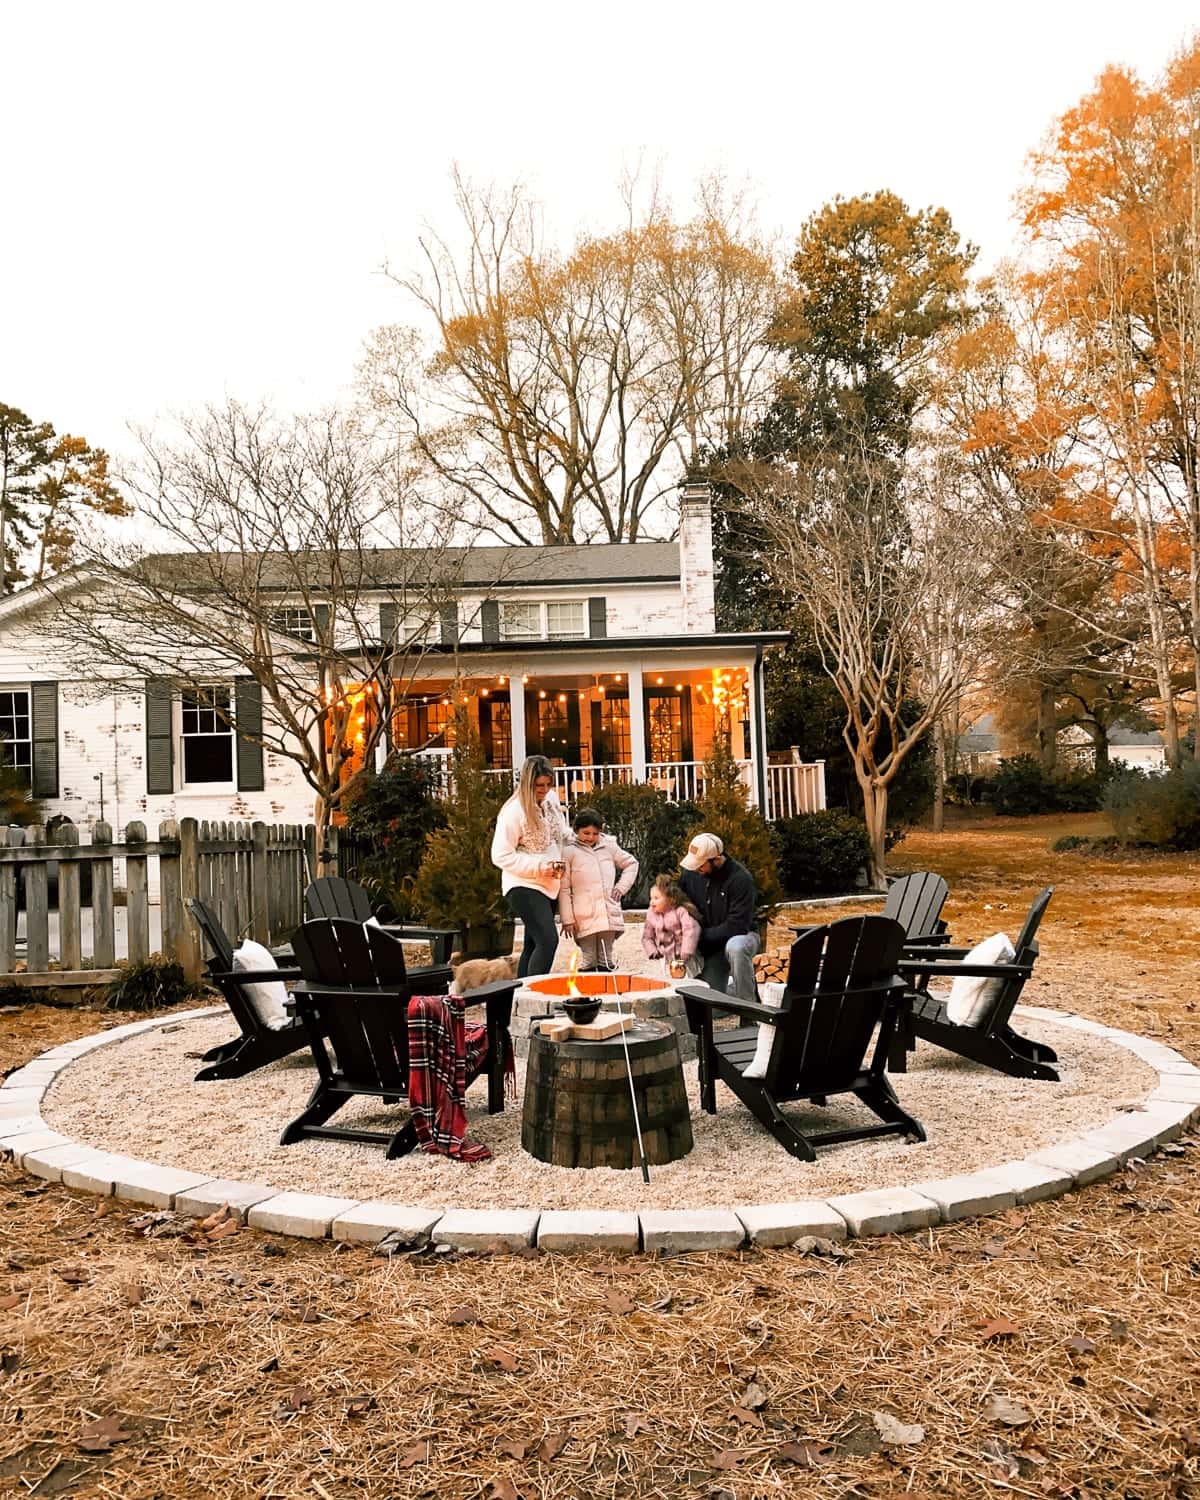 stone DIY fire pit with pea gravel and adirondack chairs